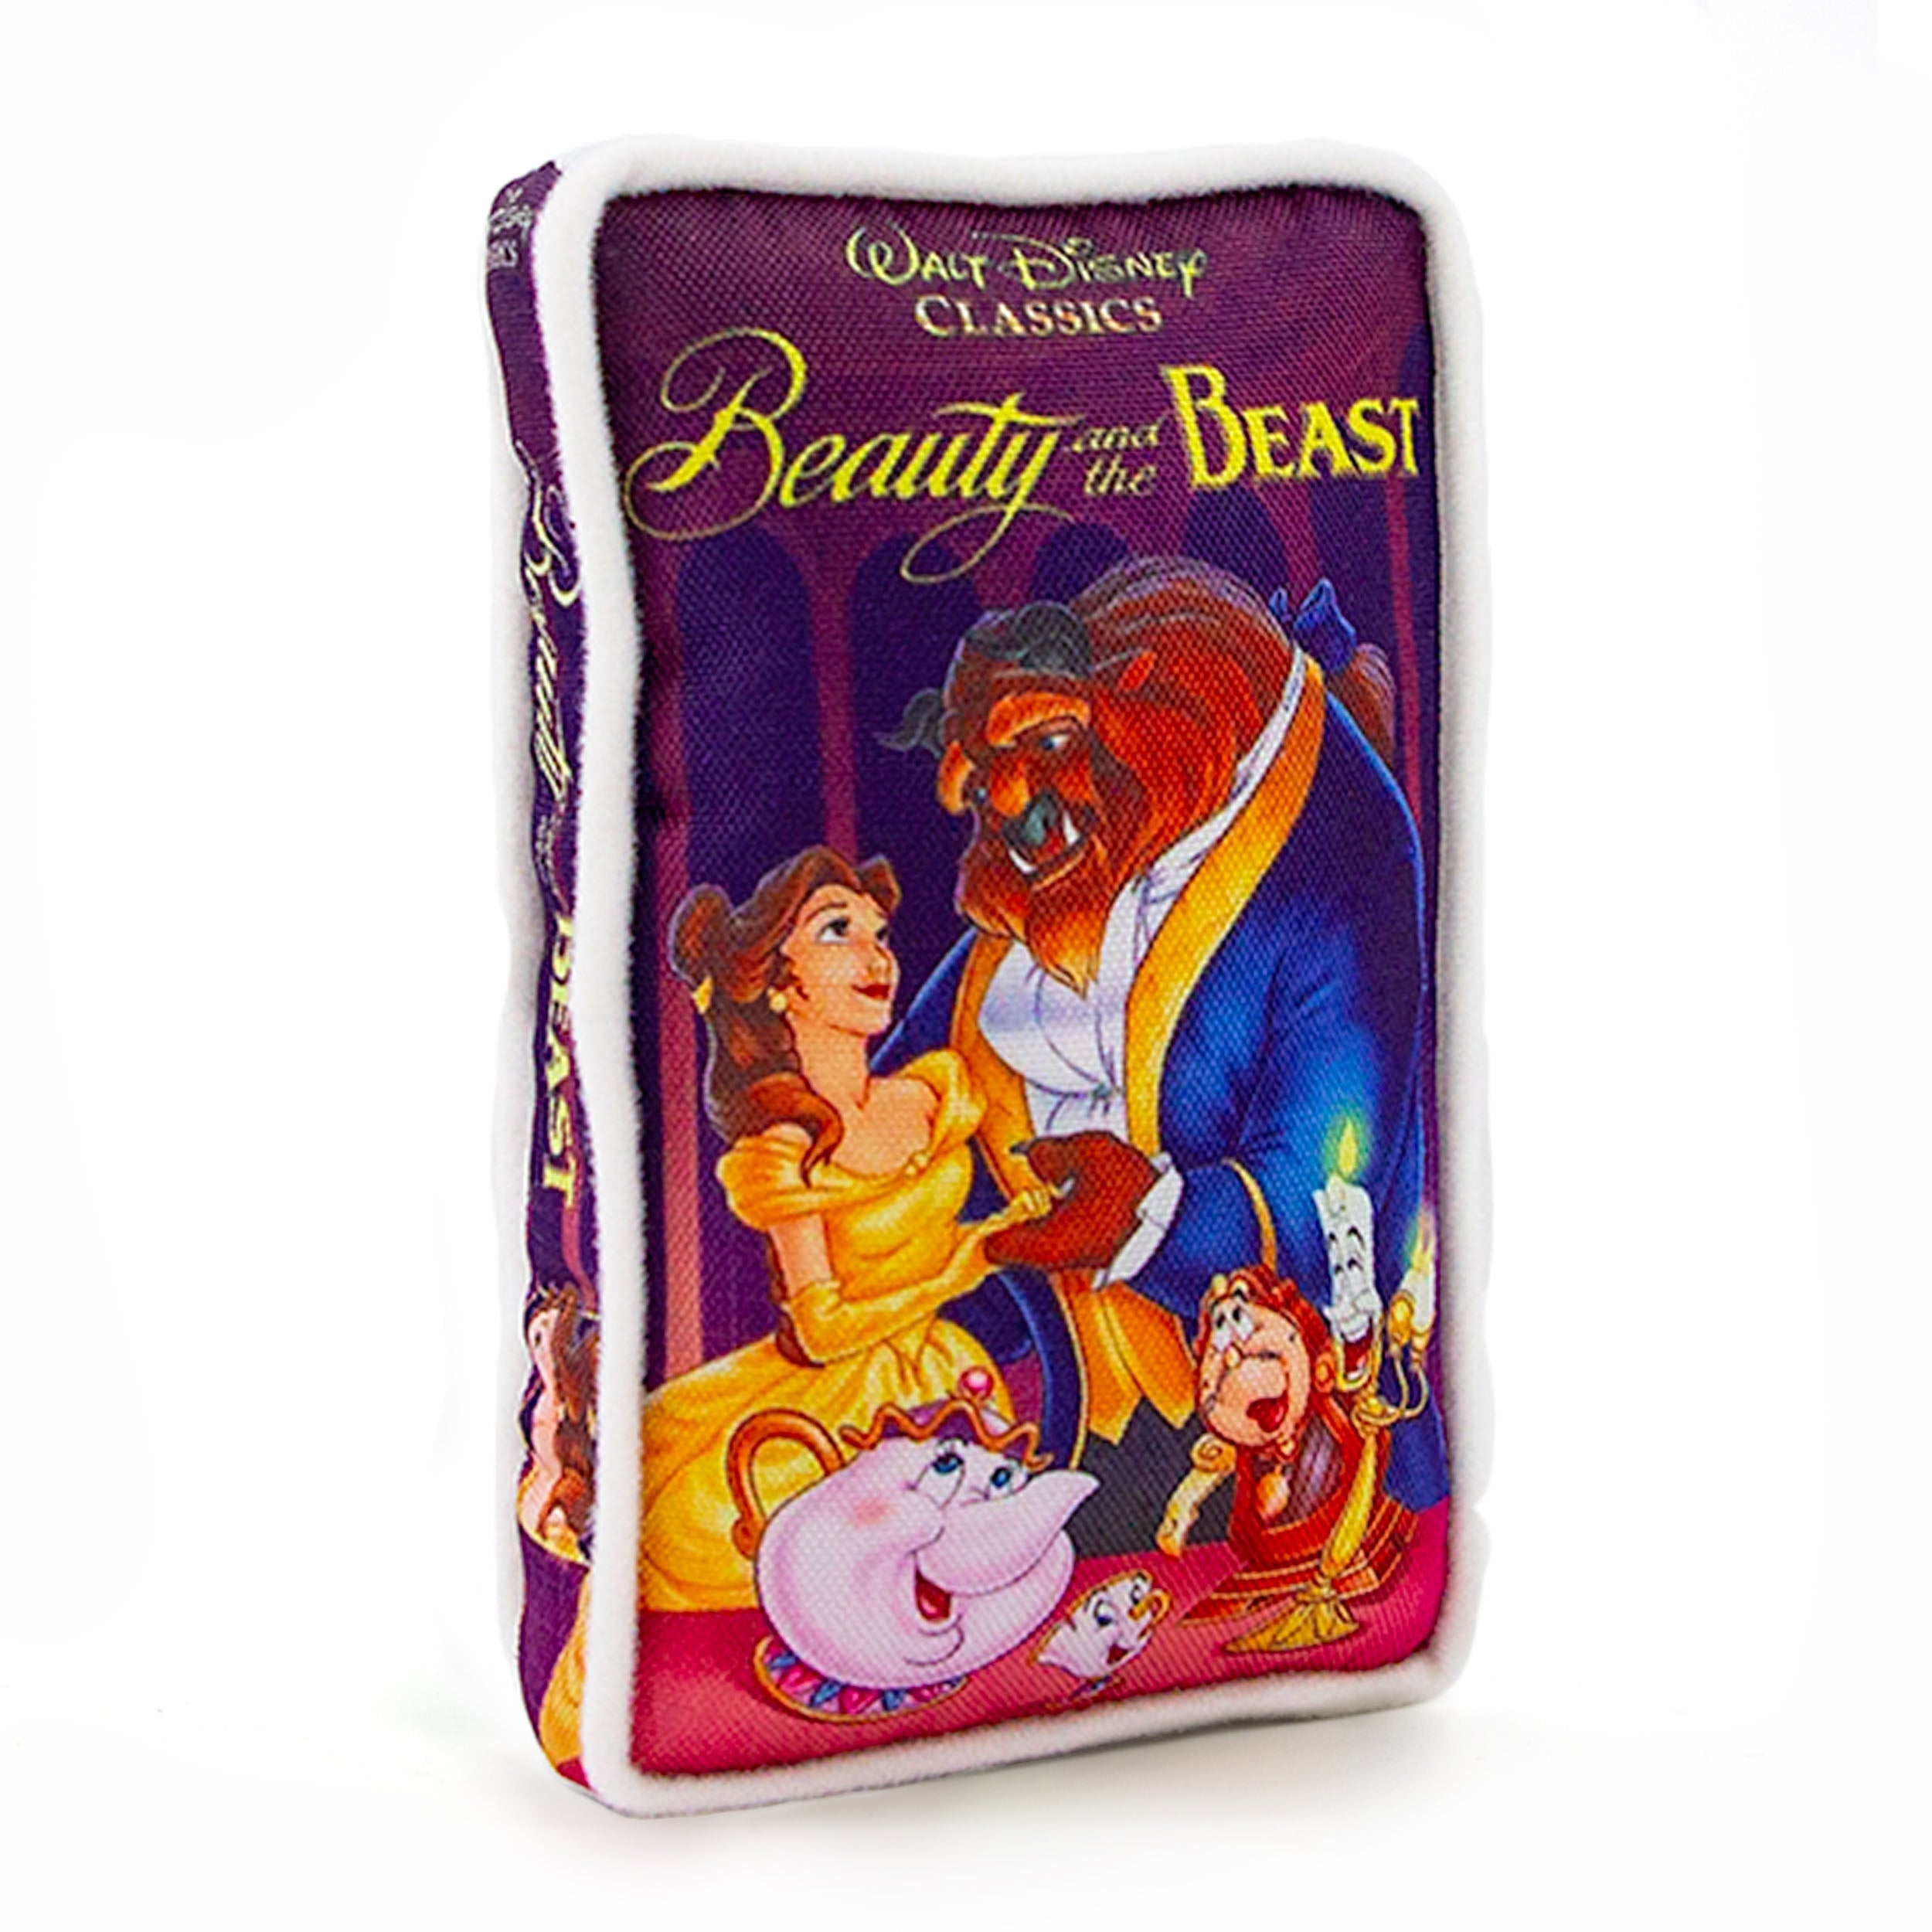 Disney Beauty and the Beast VHS Tape Replica Plush Squeaker Dog Toy